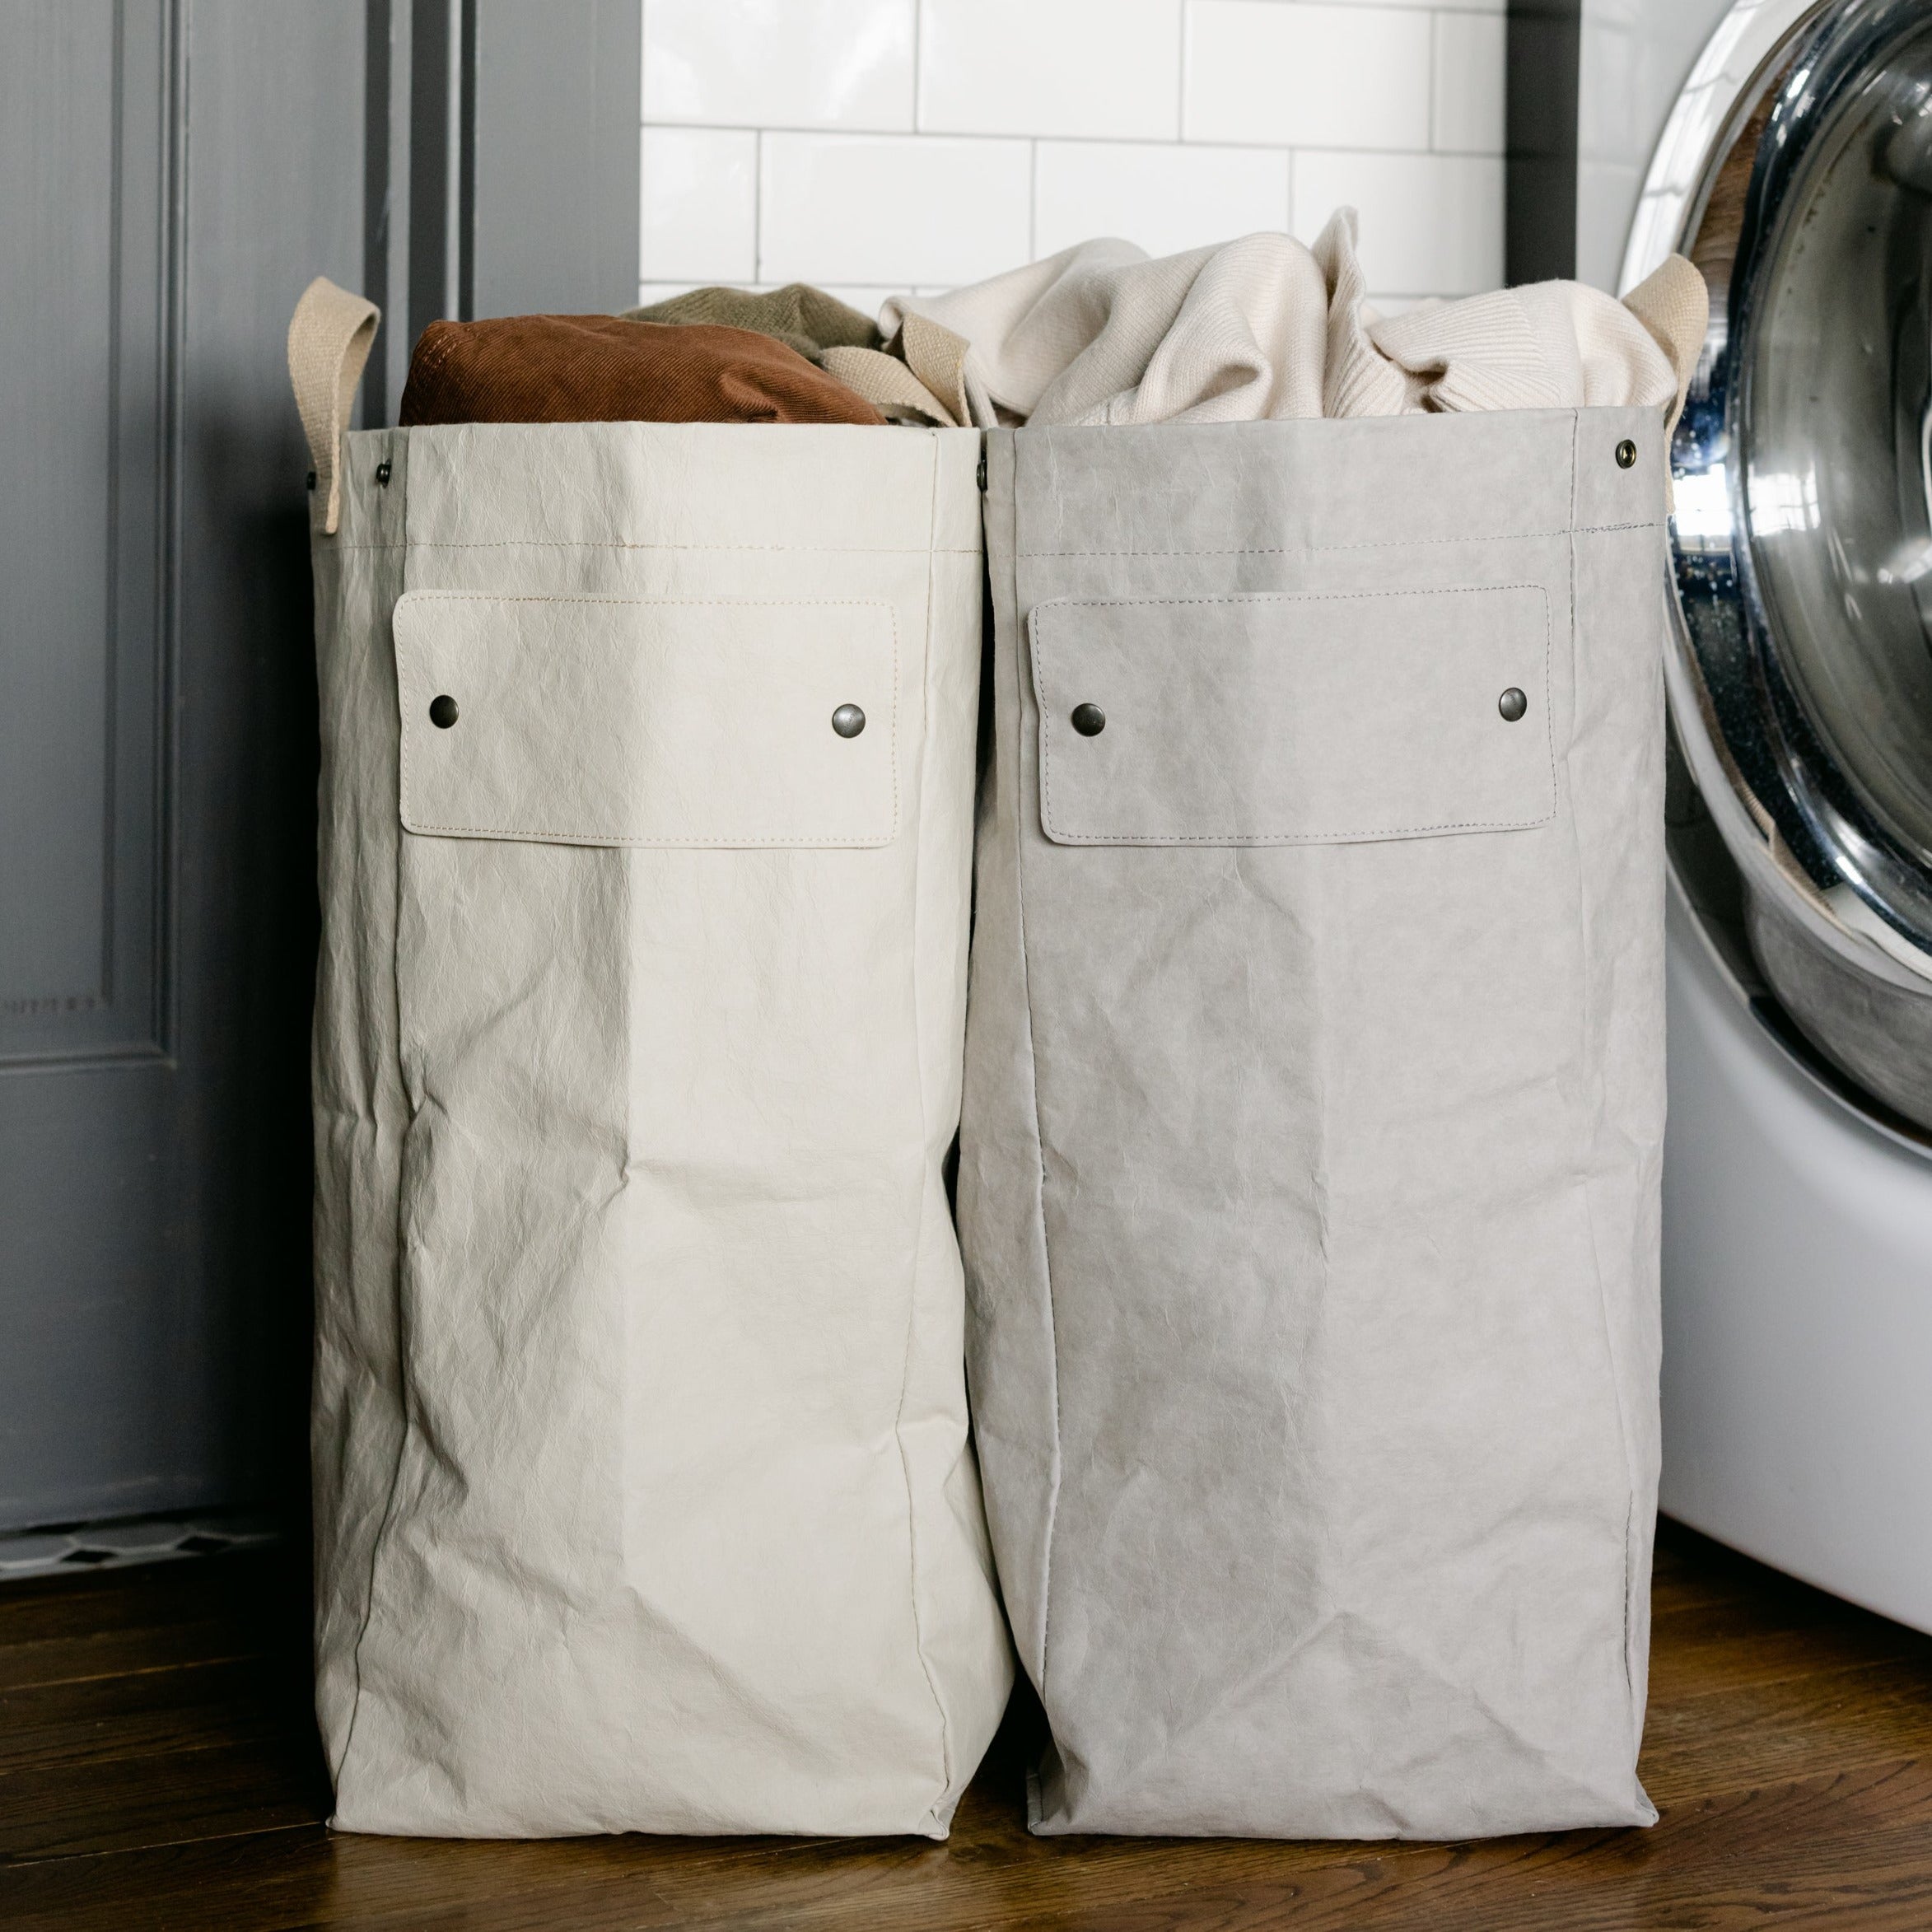 The Hamper That Makes Laundry Fun